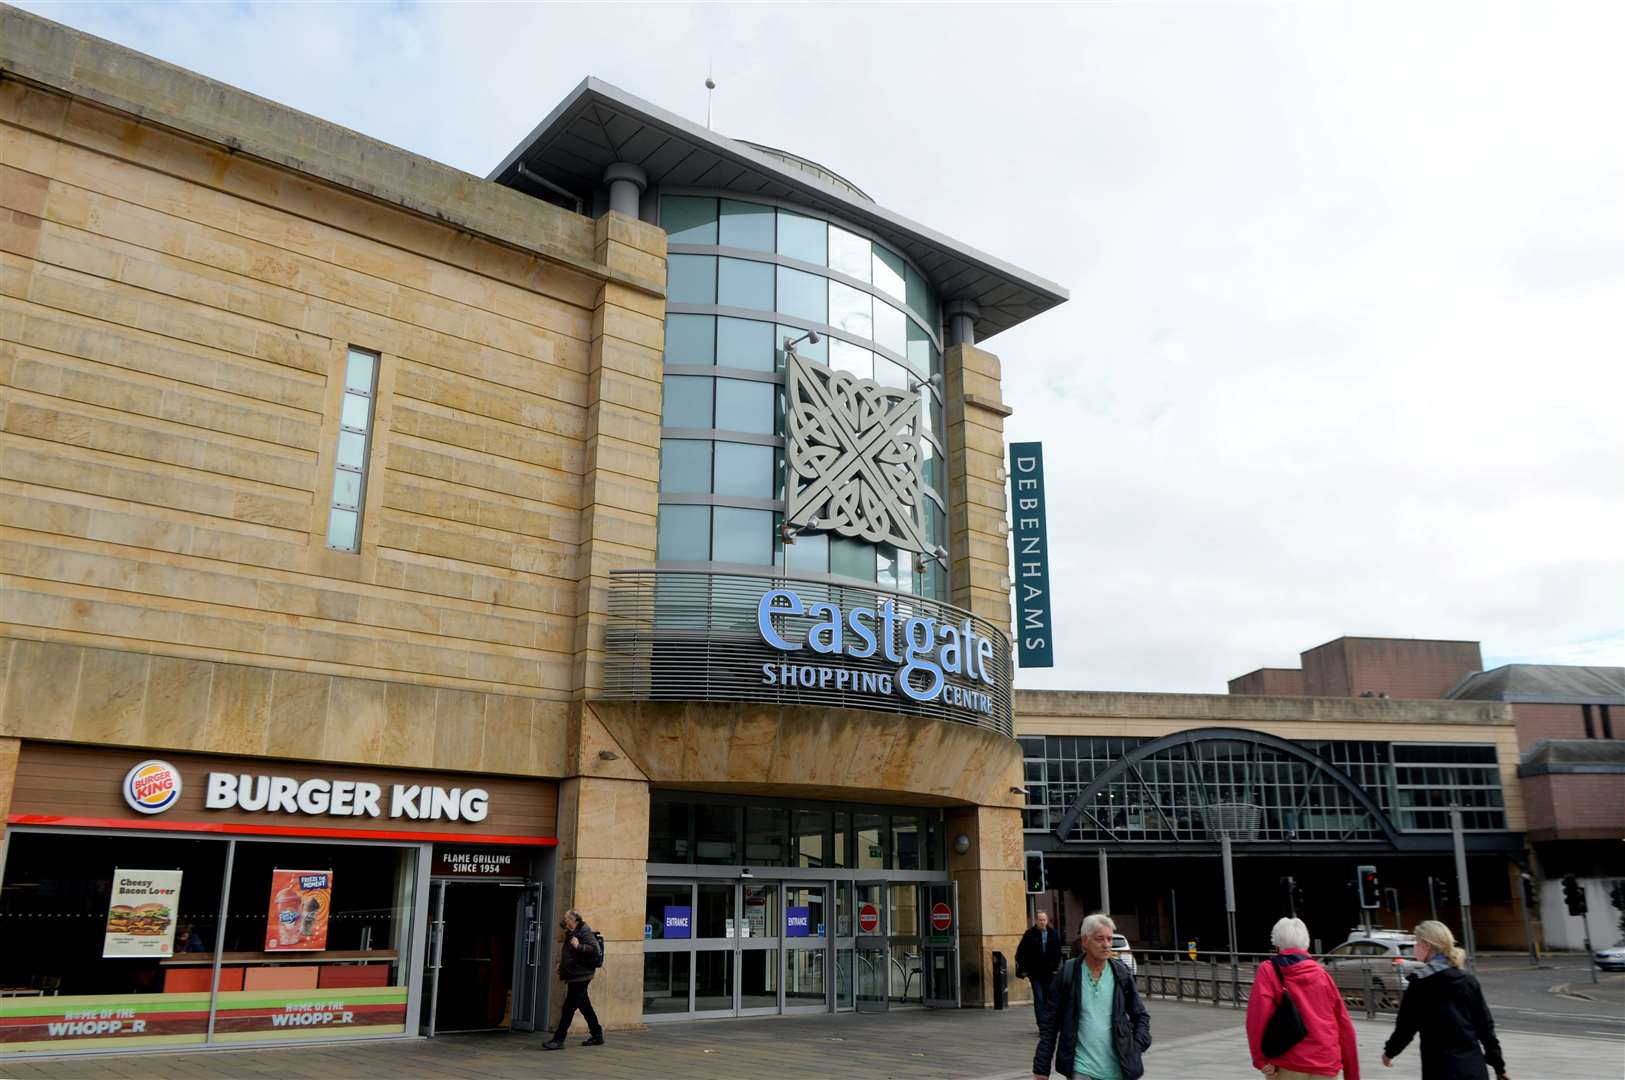 Eastgate Shopping Centre.